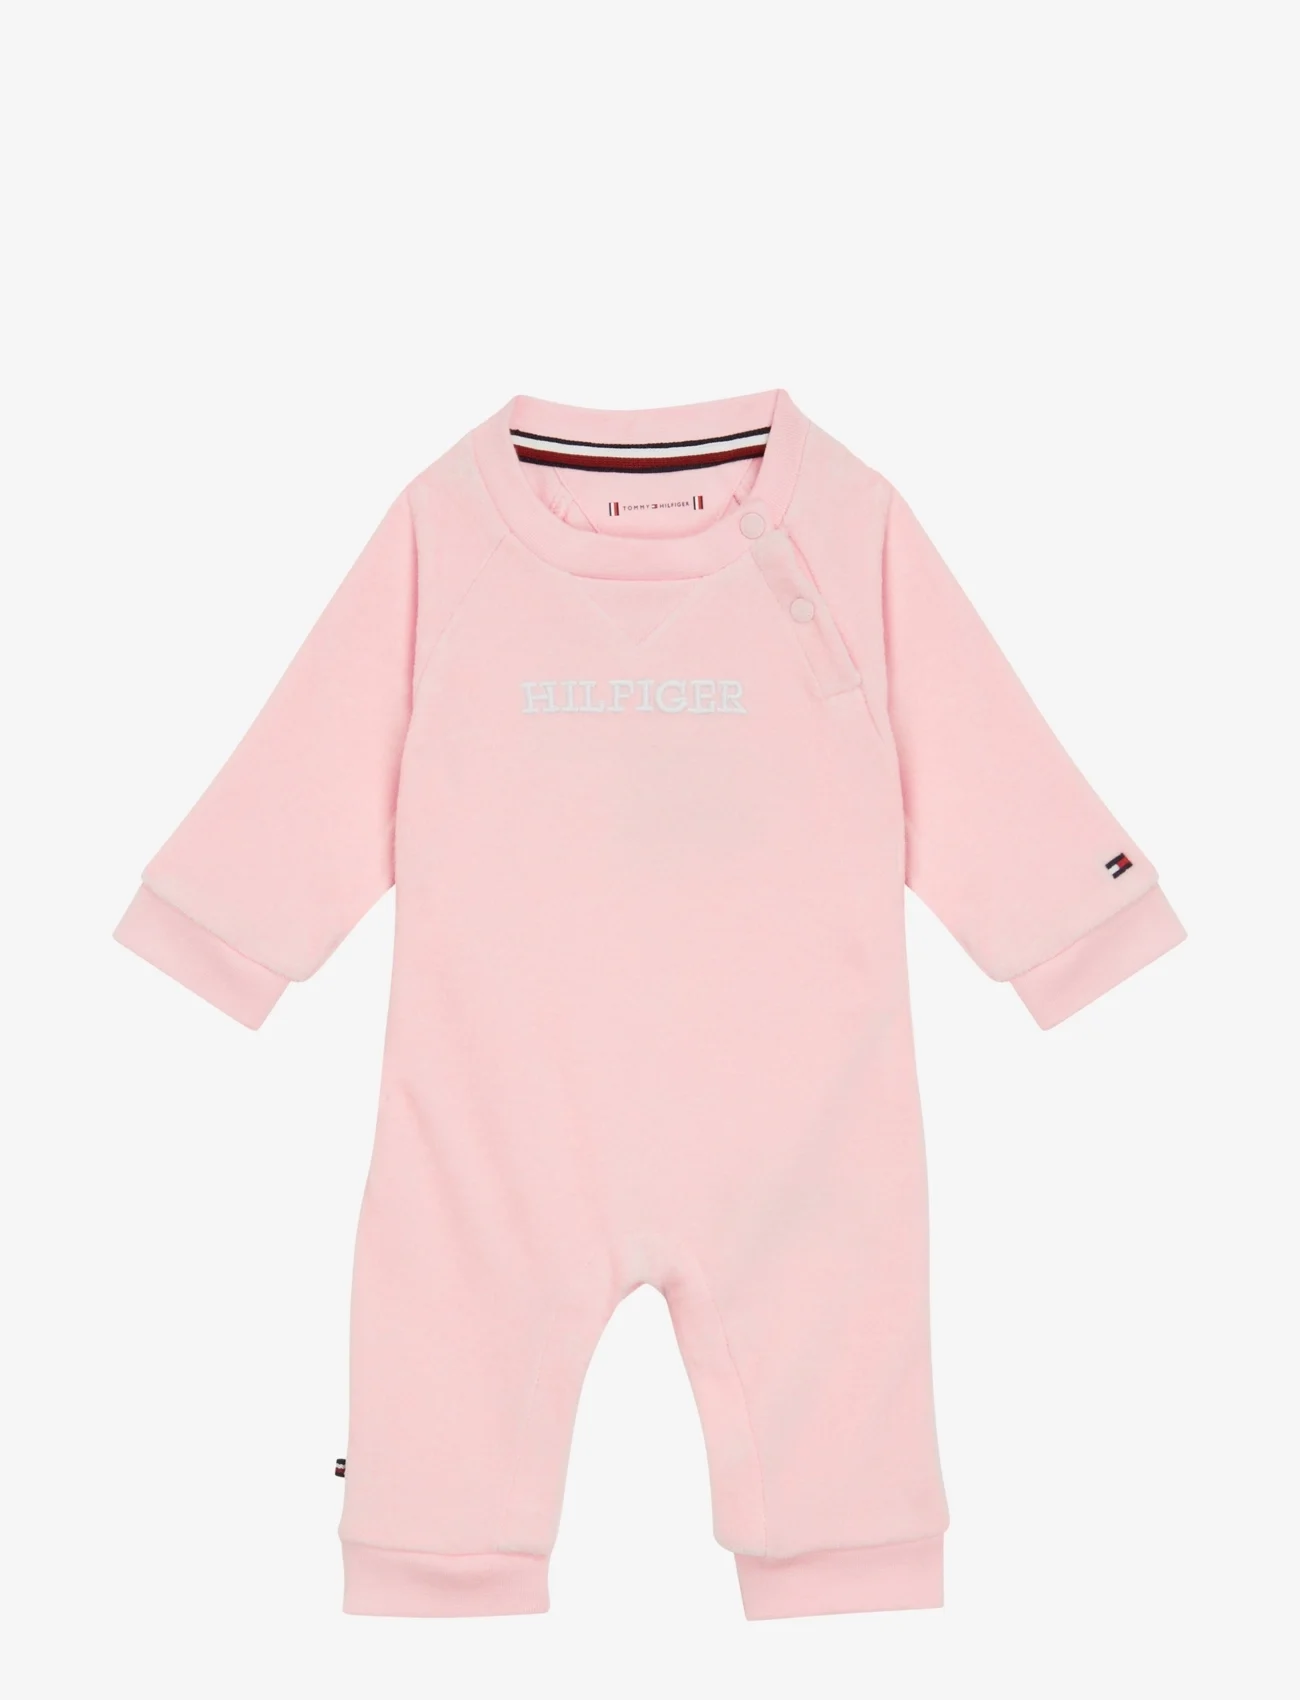 Tommy Hilfiger - BABY CURVED MONOTYPE COVERALL - met lange mouwen - pink crystal - 0